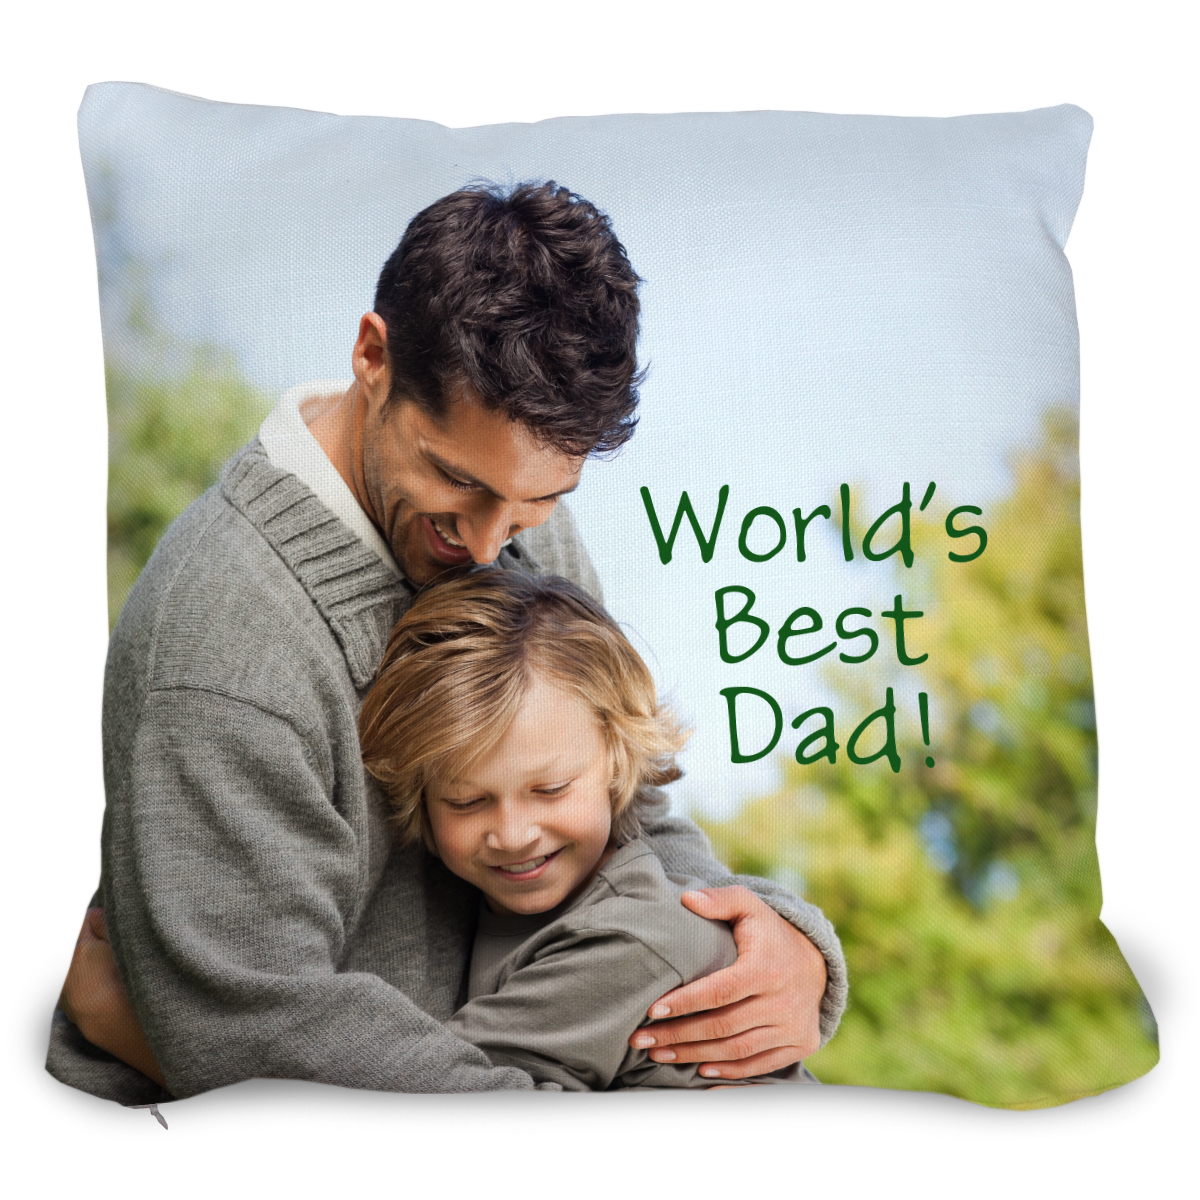 Custom the pillow with a photo and text